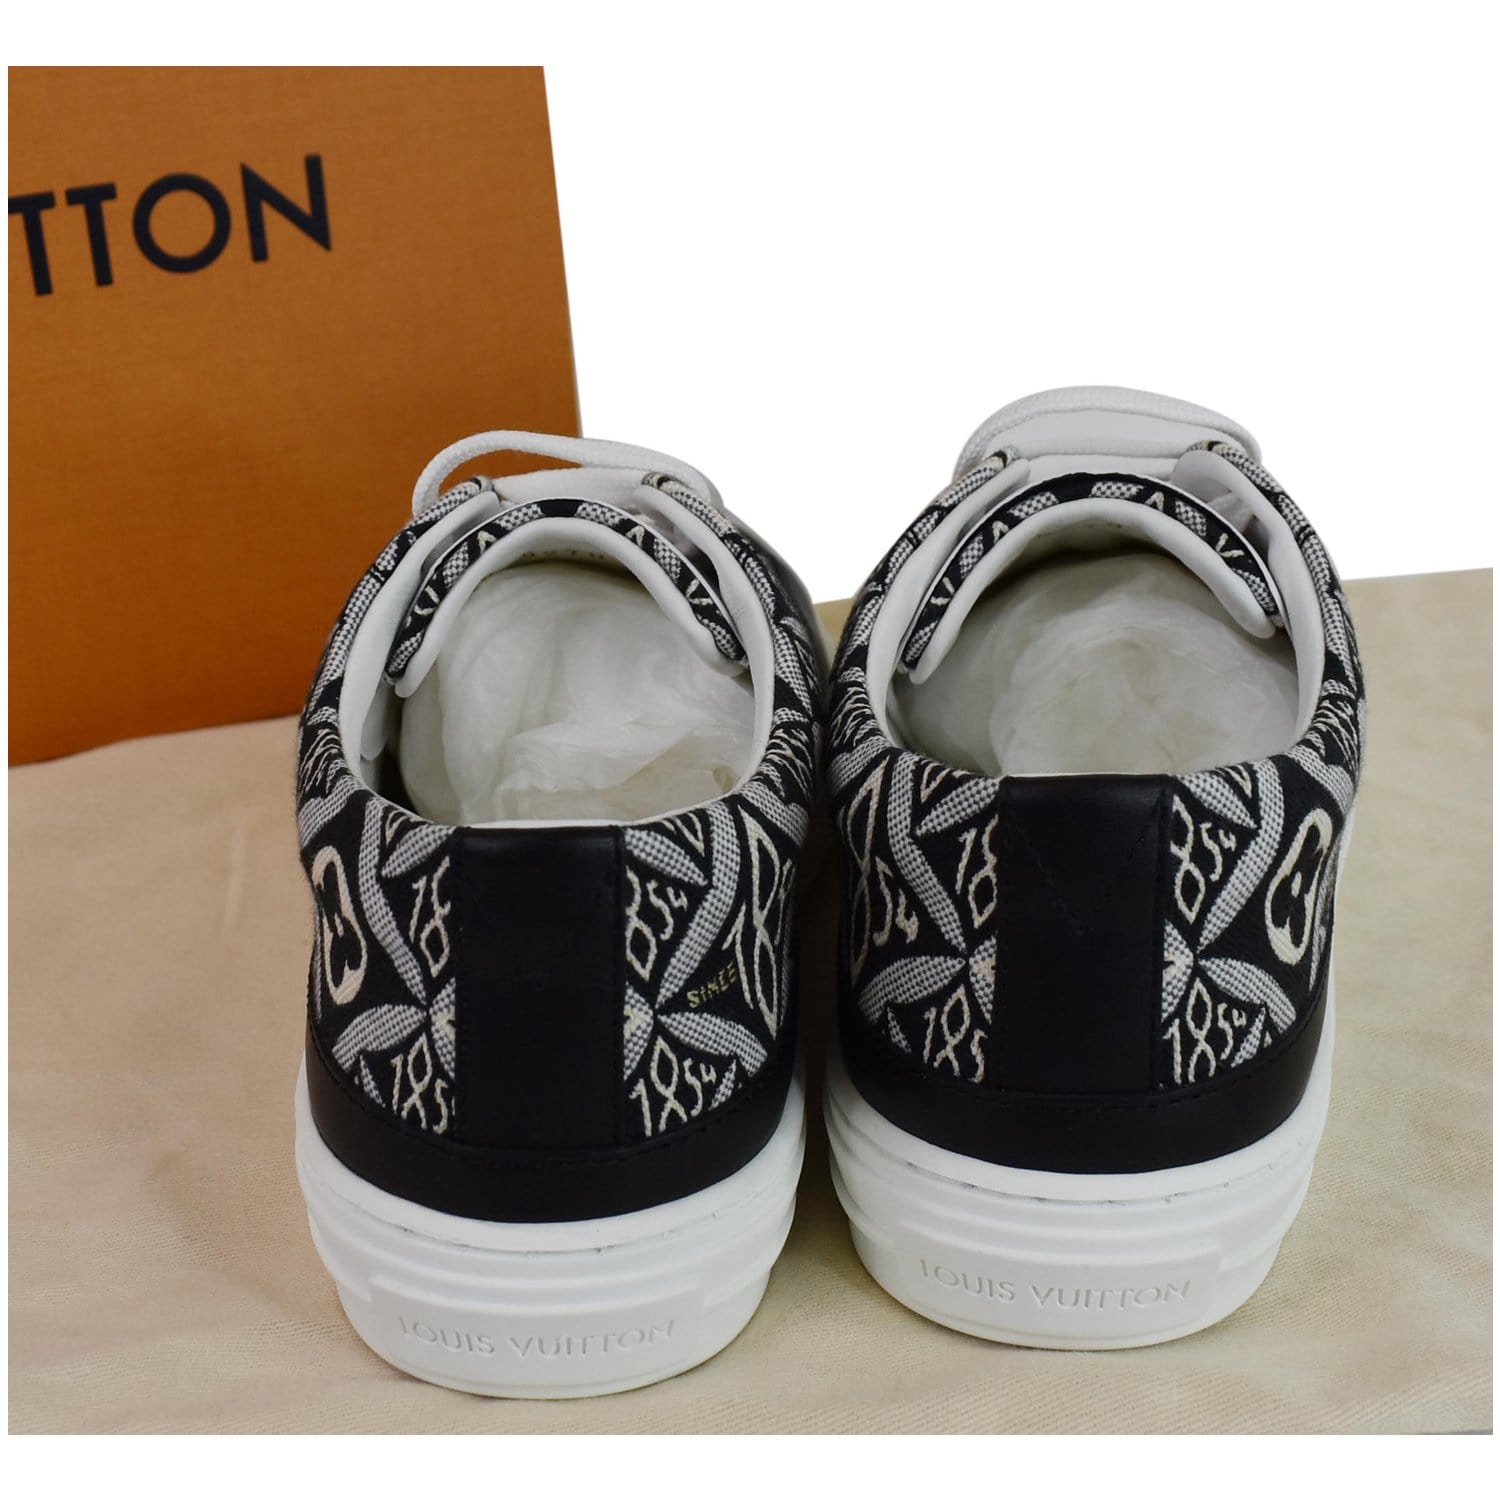 Louis Vuitton, men's sneaker, leather as well as differe…